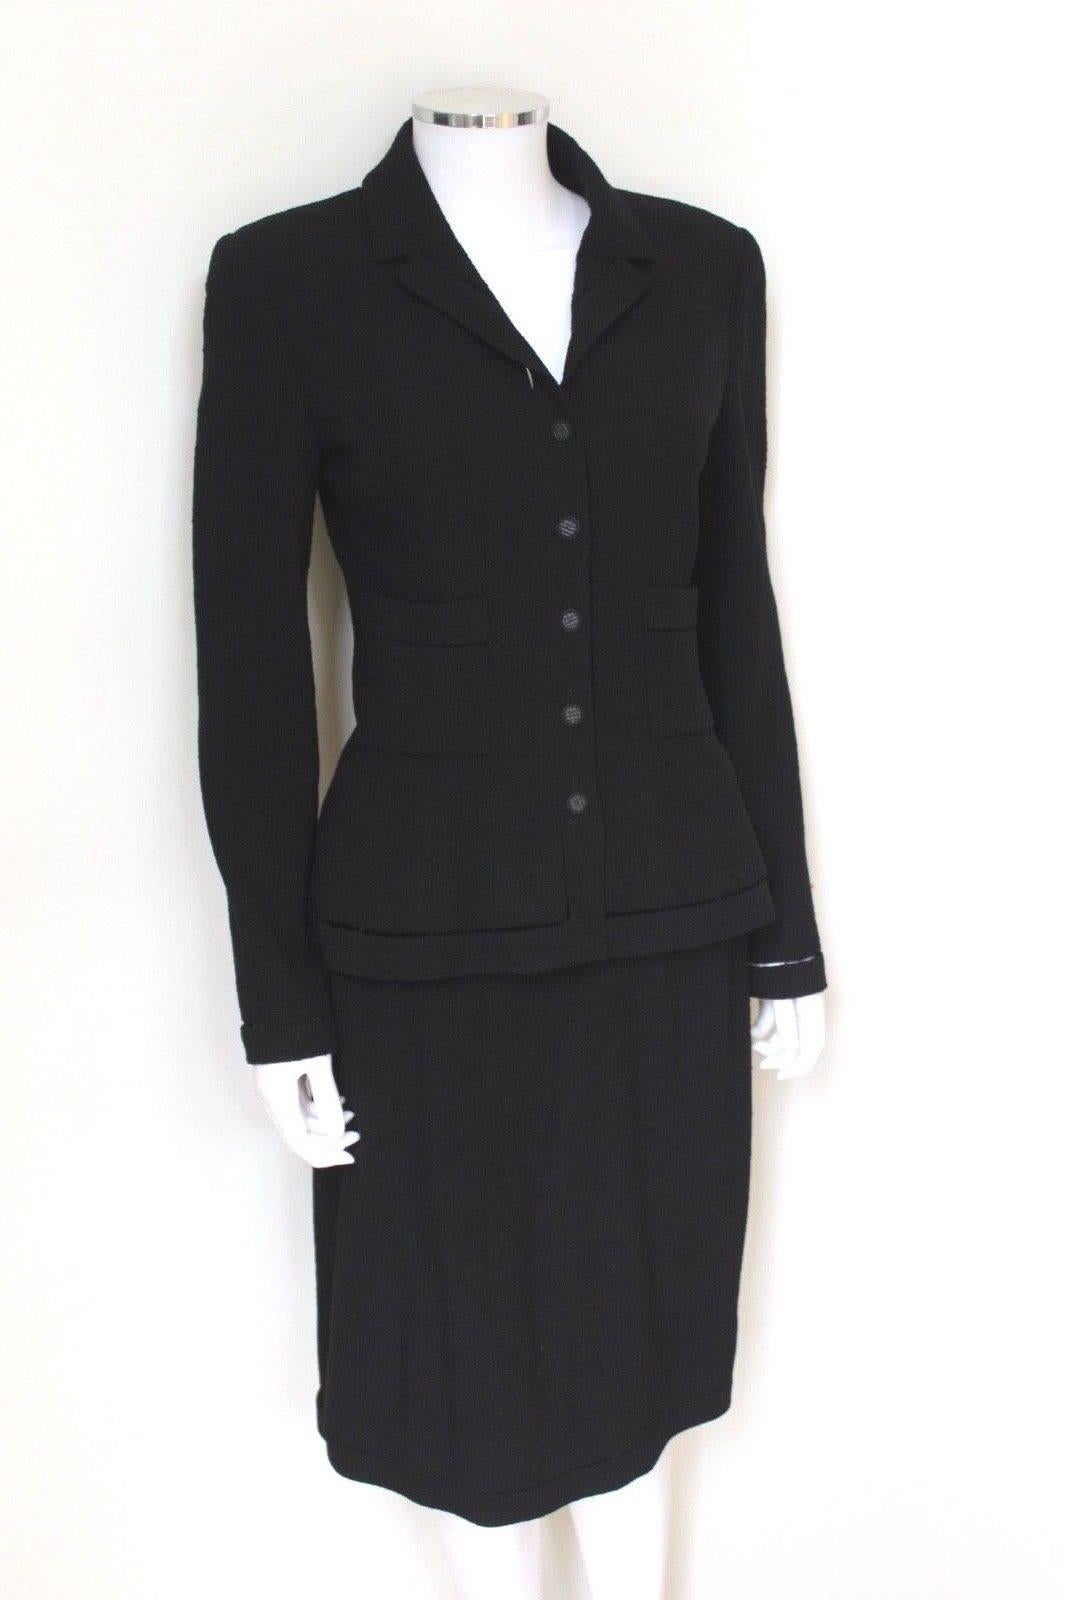 Chanel Black Classic Skirt Suit Jacket F38 uk 10 
This is a flattering fitted cut with logo buttons to the front 
Split trim to the hems, detail can as seen in the last photos 
Lined in silk with chain to the hem 
94% Wool 6% Polyester
Jacket length